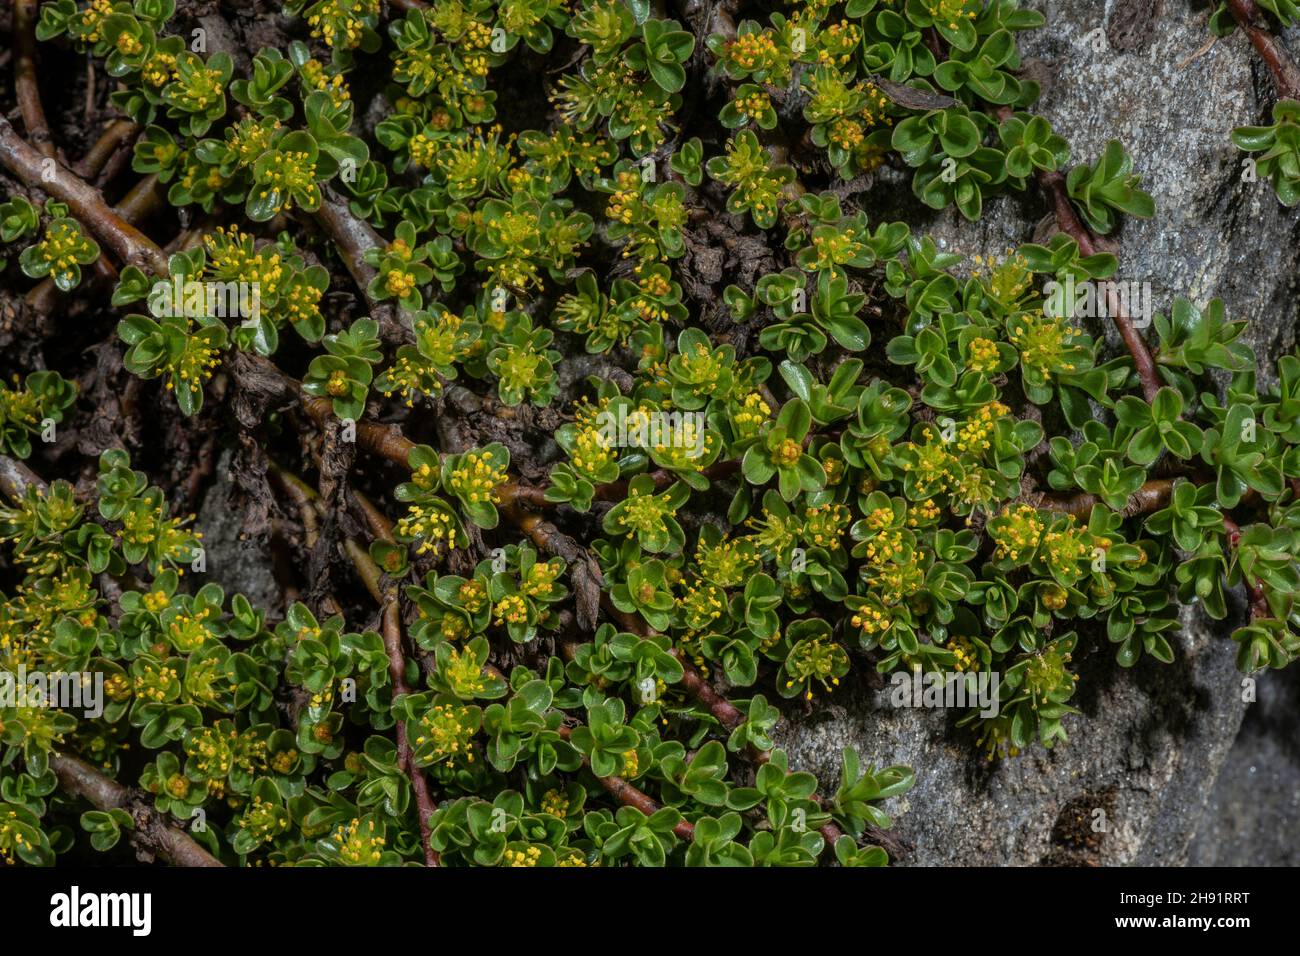 Thyme-leaved willow, Salix serpyllifolia, old plant with male catkins. High altitude, French Alps. Stock Photo